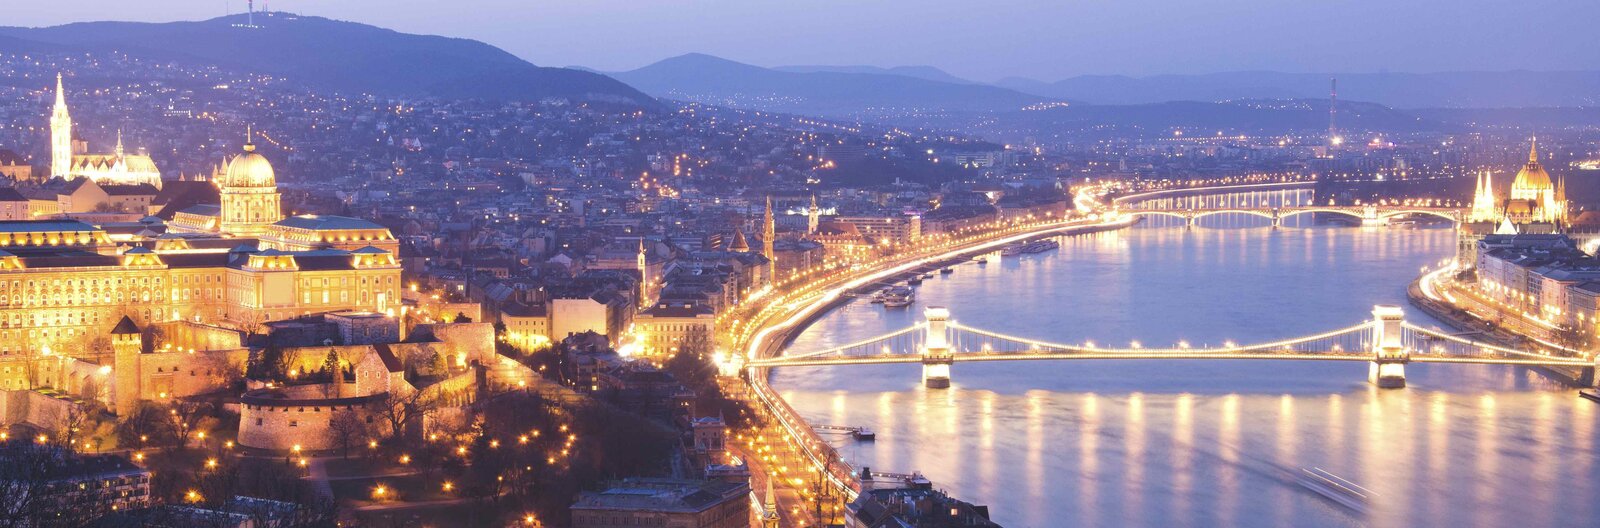 Top 10 things to do in Budapest